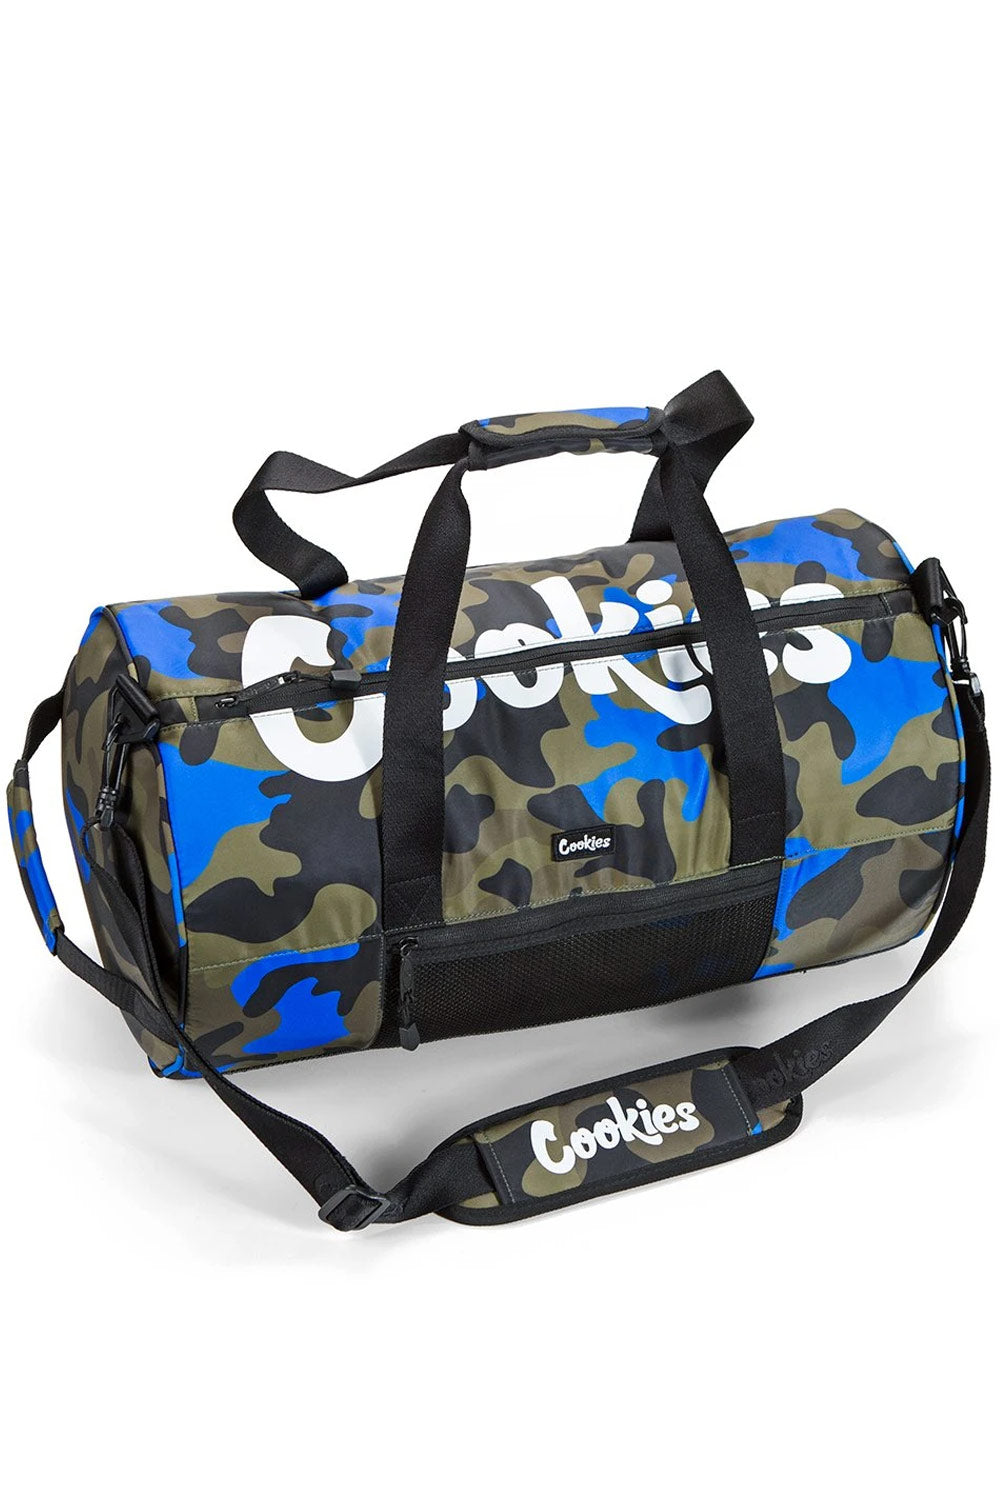 Cookies Summit Ripstop Smell Proof Duffle Bag– Mainland Skate & Surf